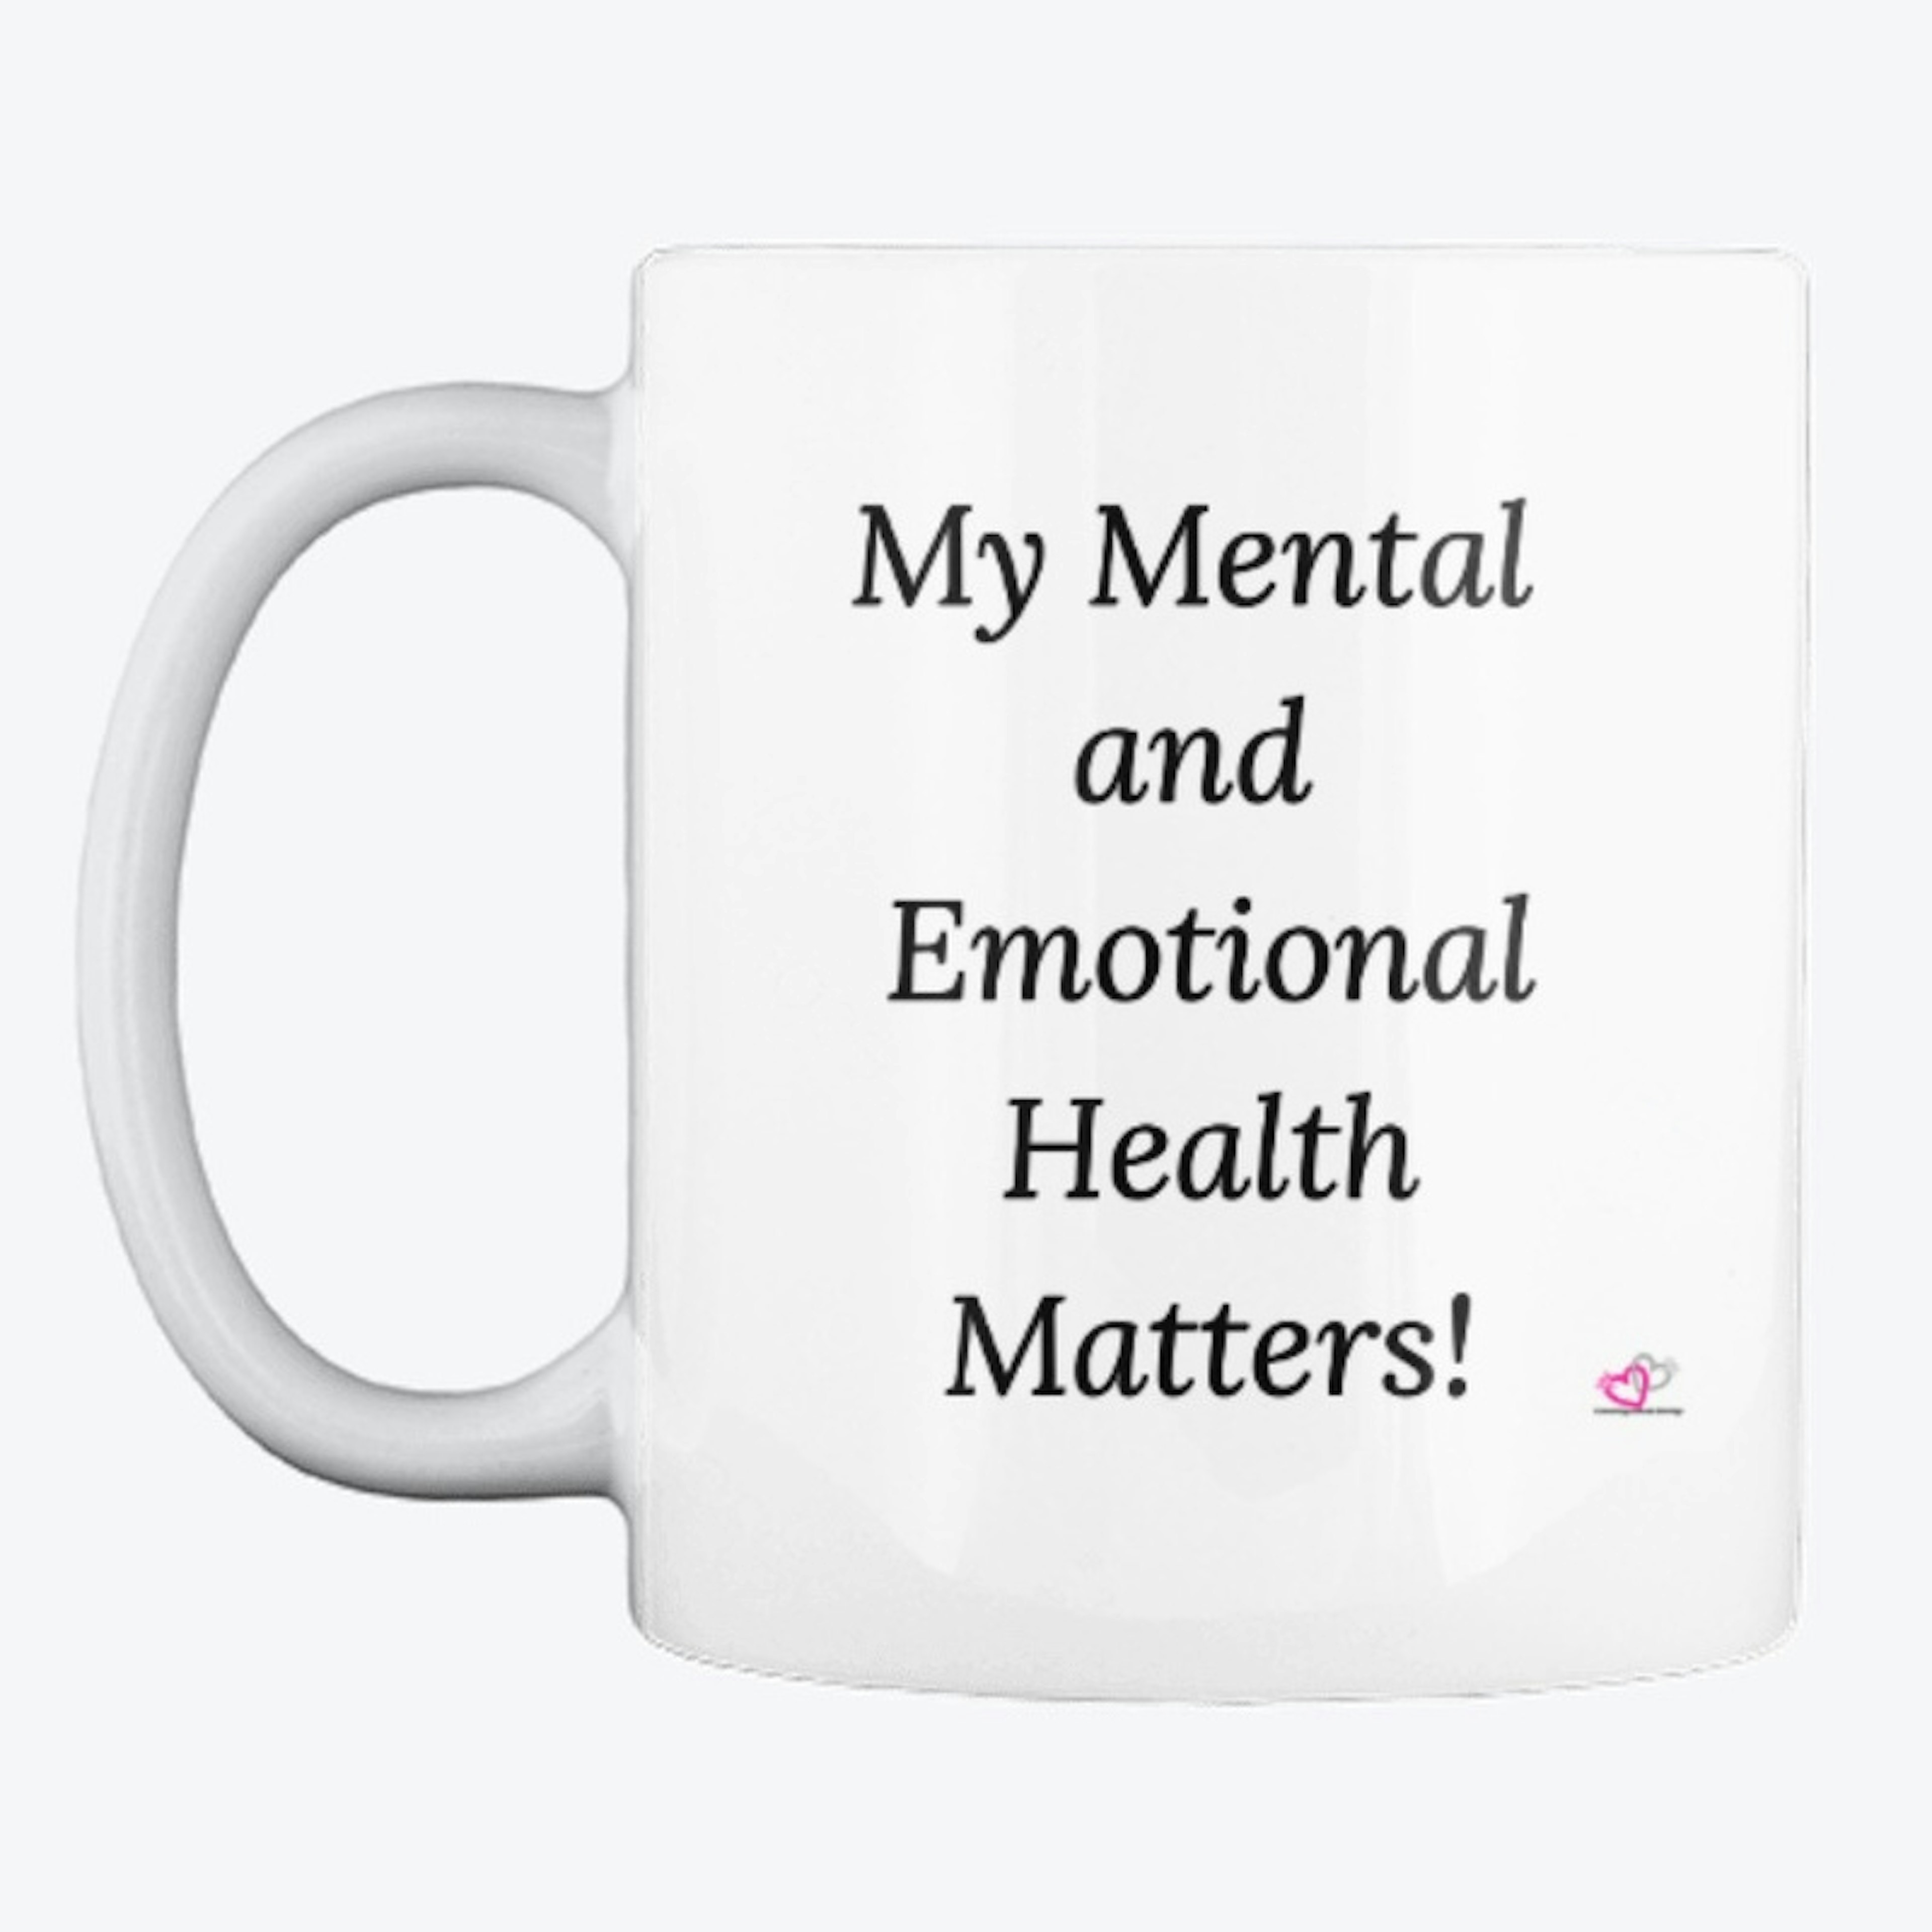 My mental and emotional health matters!